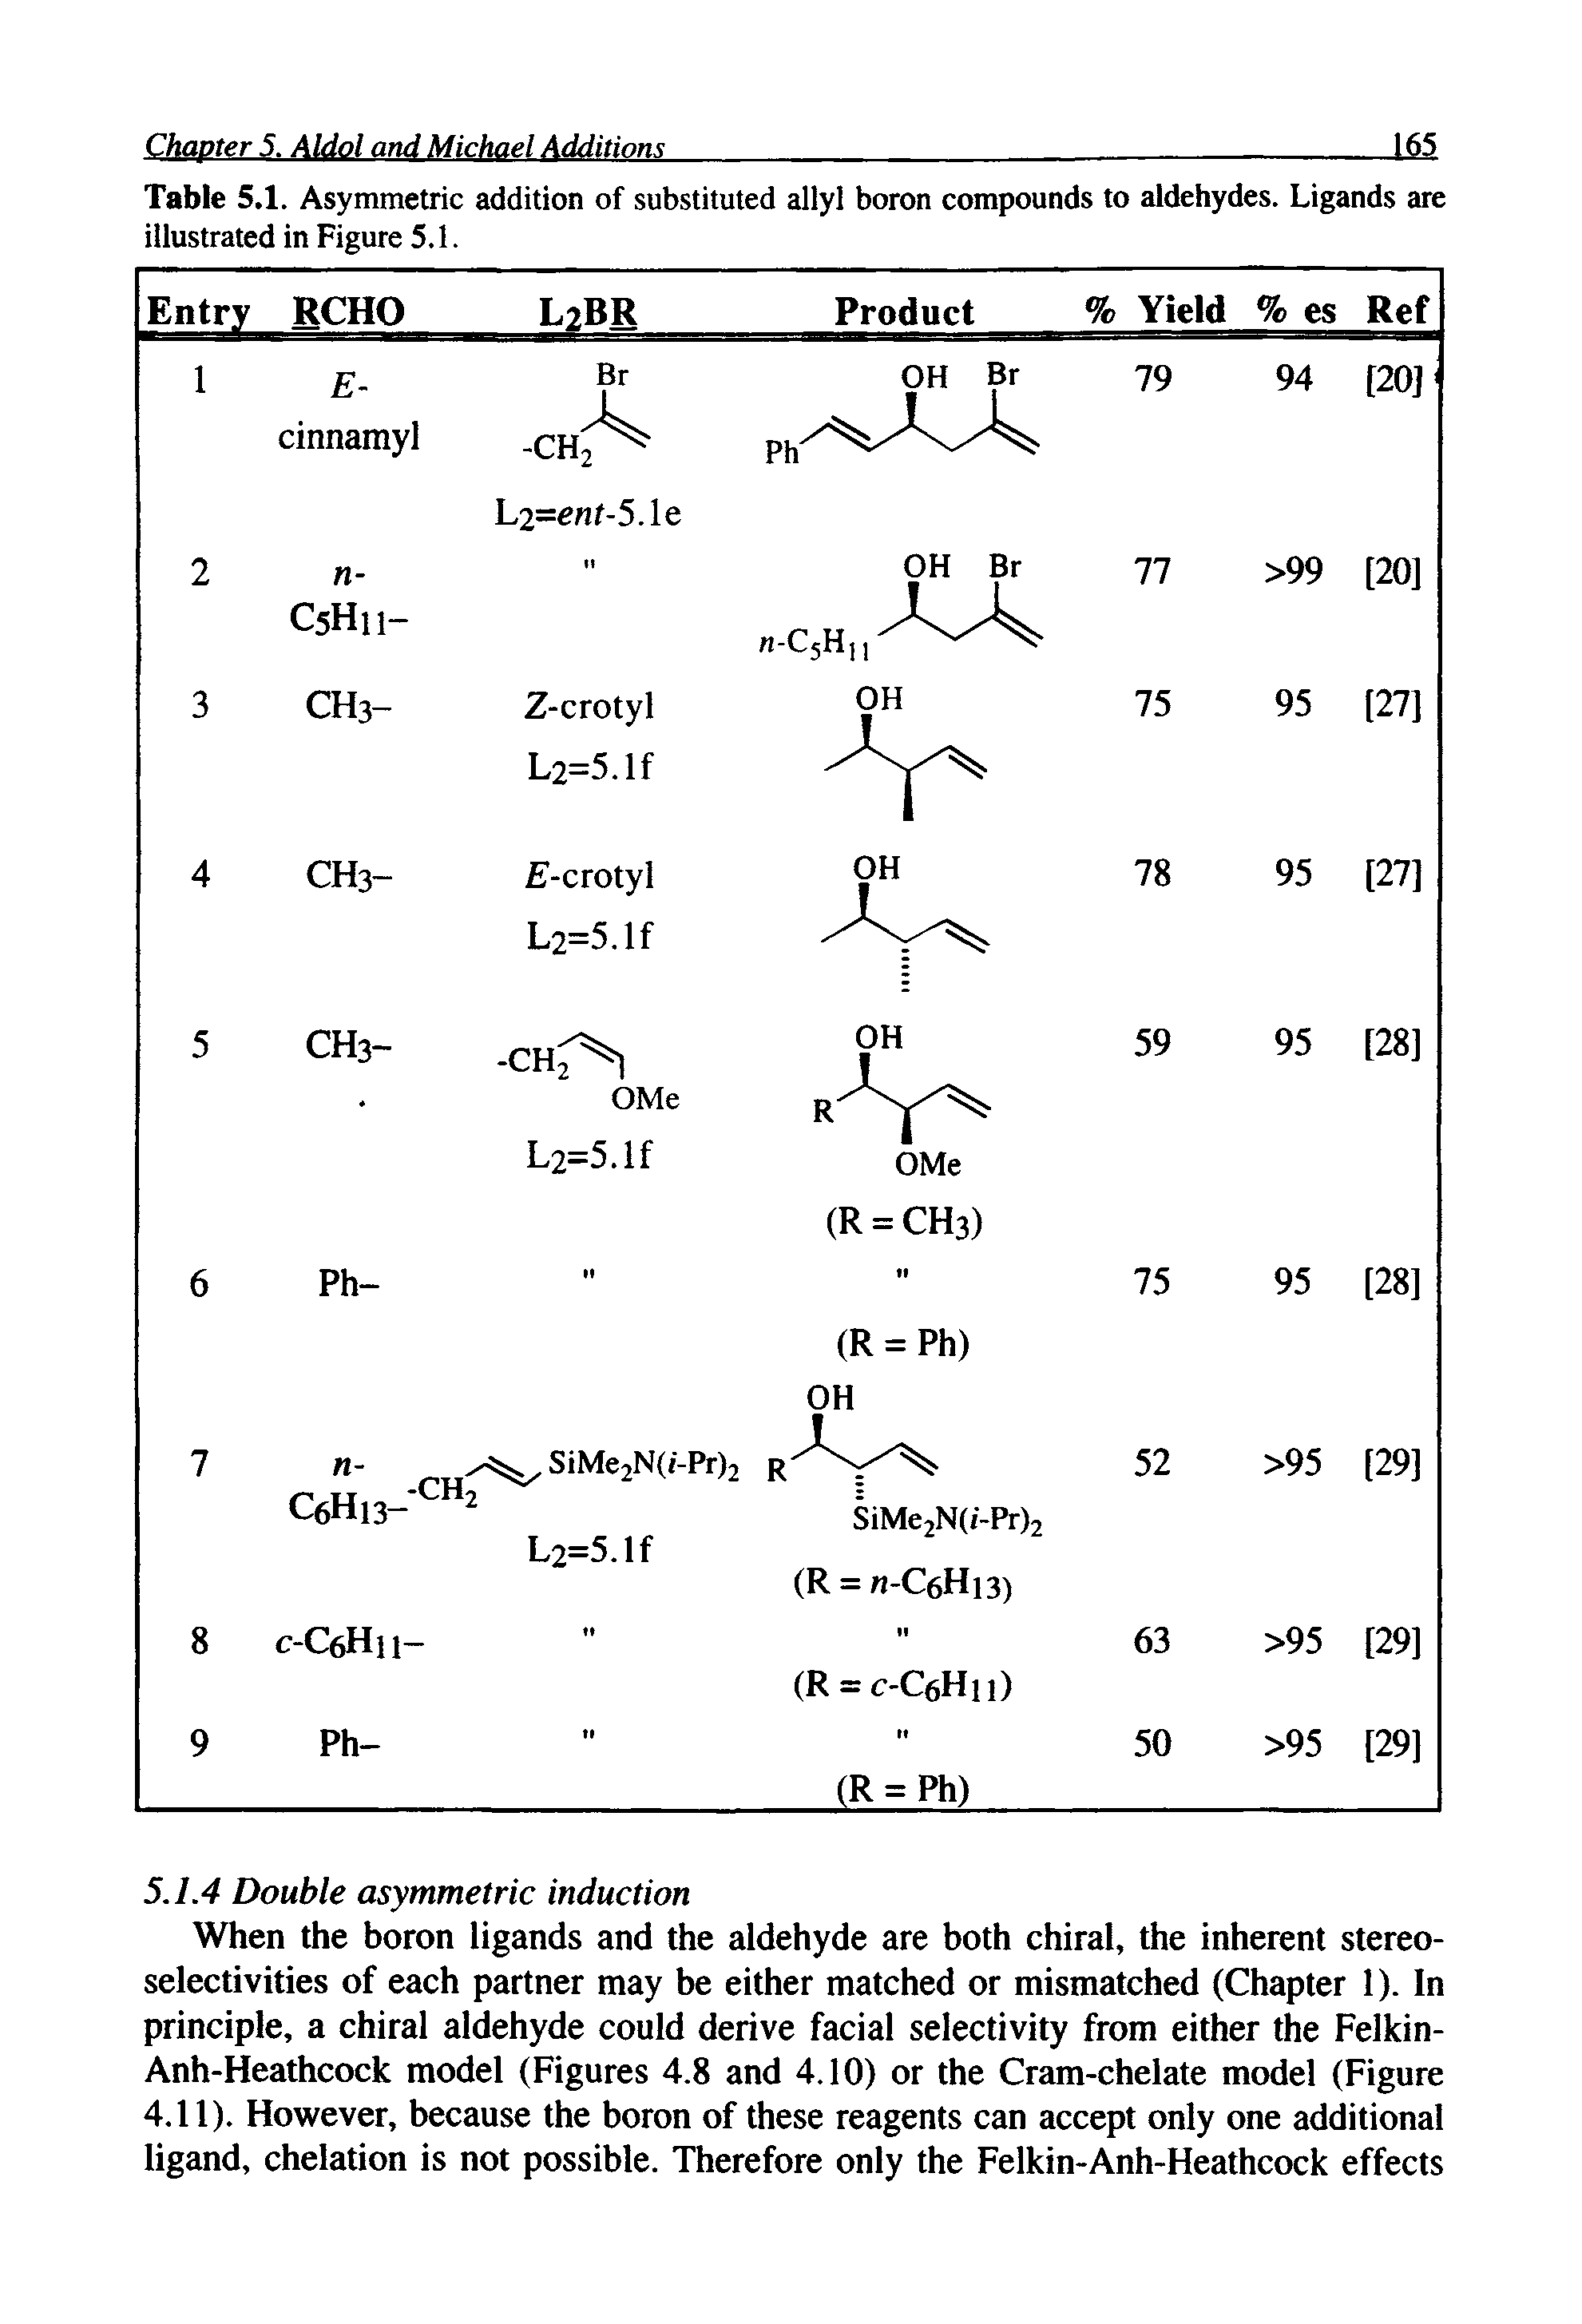 Table 5.1. Asymmetric addition of substituted allyl boron compounds to aldehydes. Ligands are illustrated in Figure 5.1.